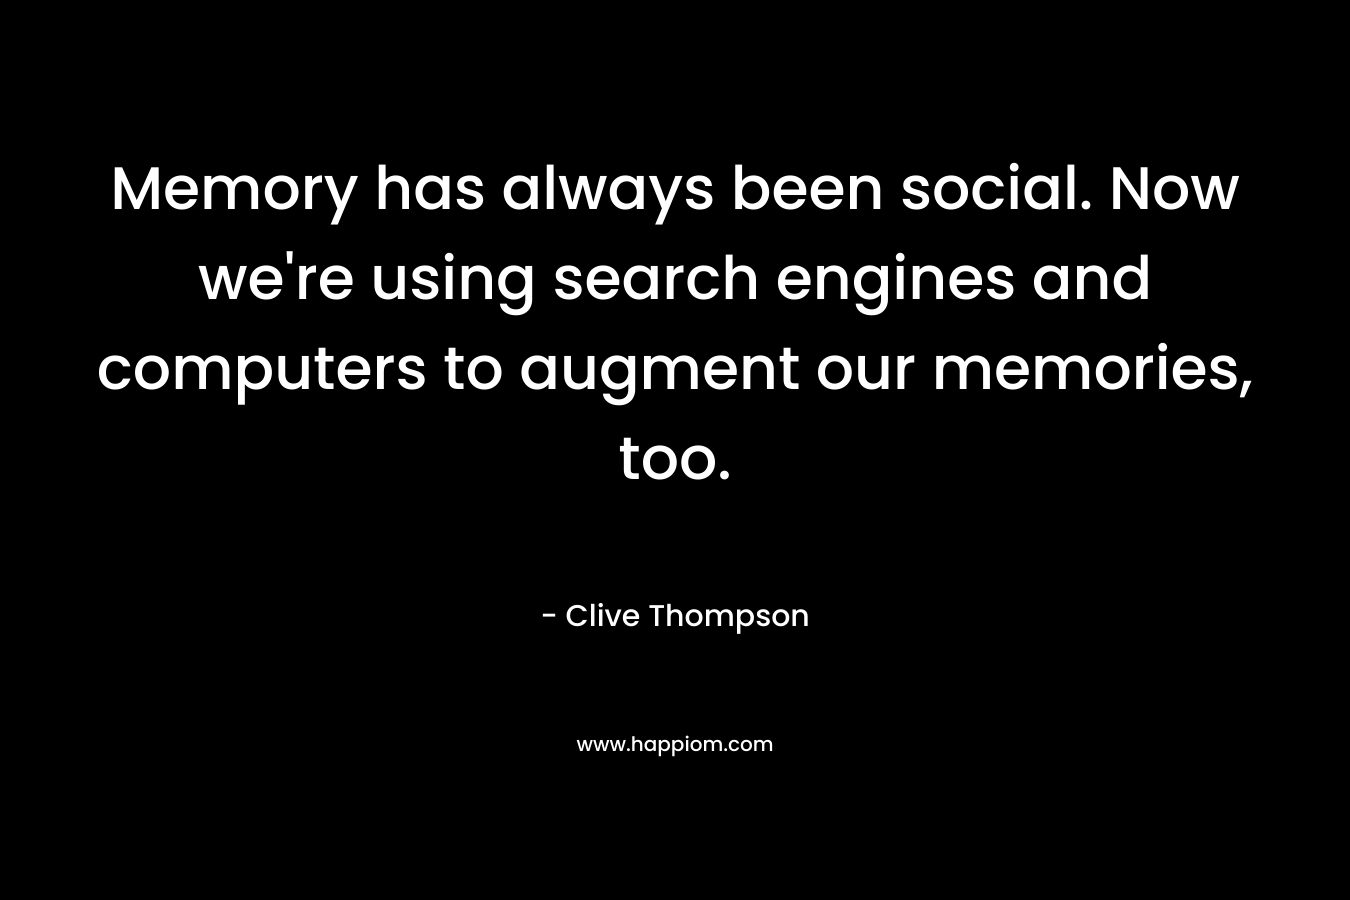 Memory has always been social. Now we’re using search engines and computers to augment our memories, too. – Clive Thompson